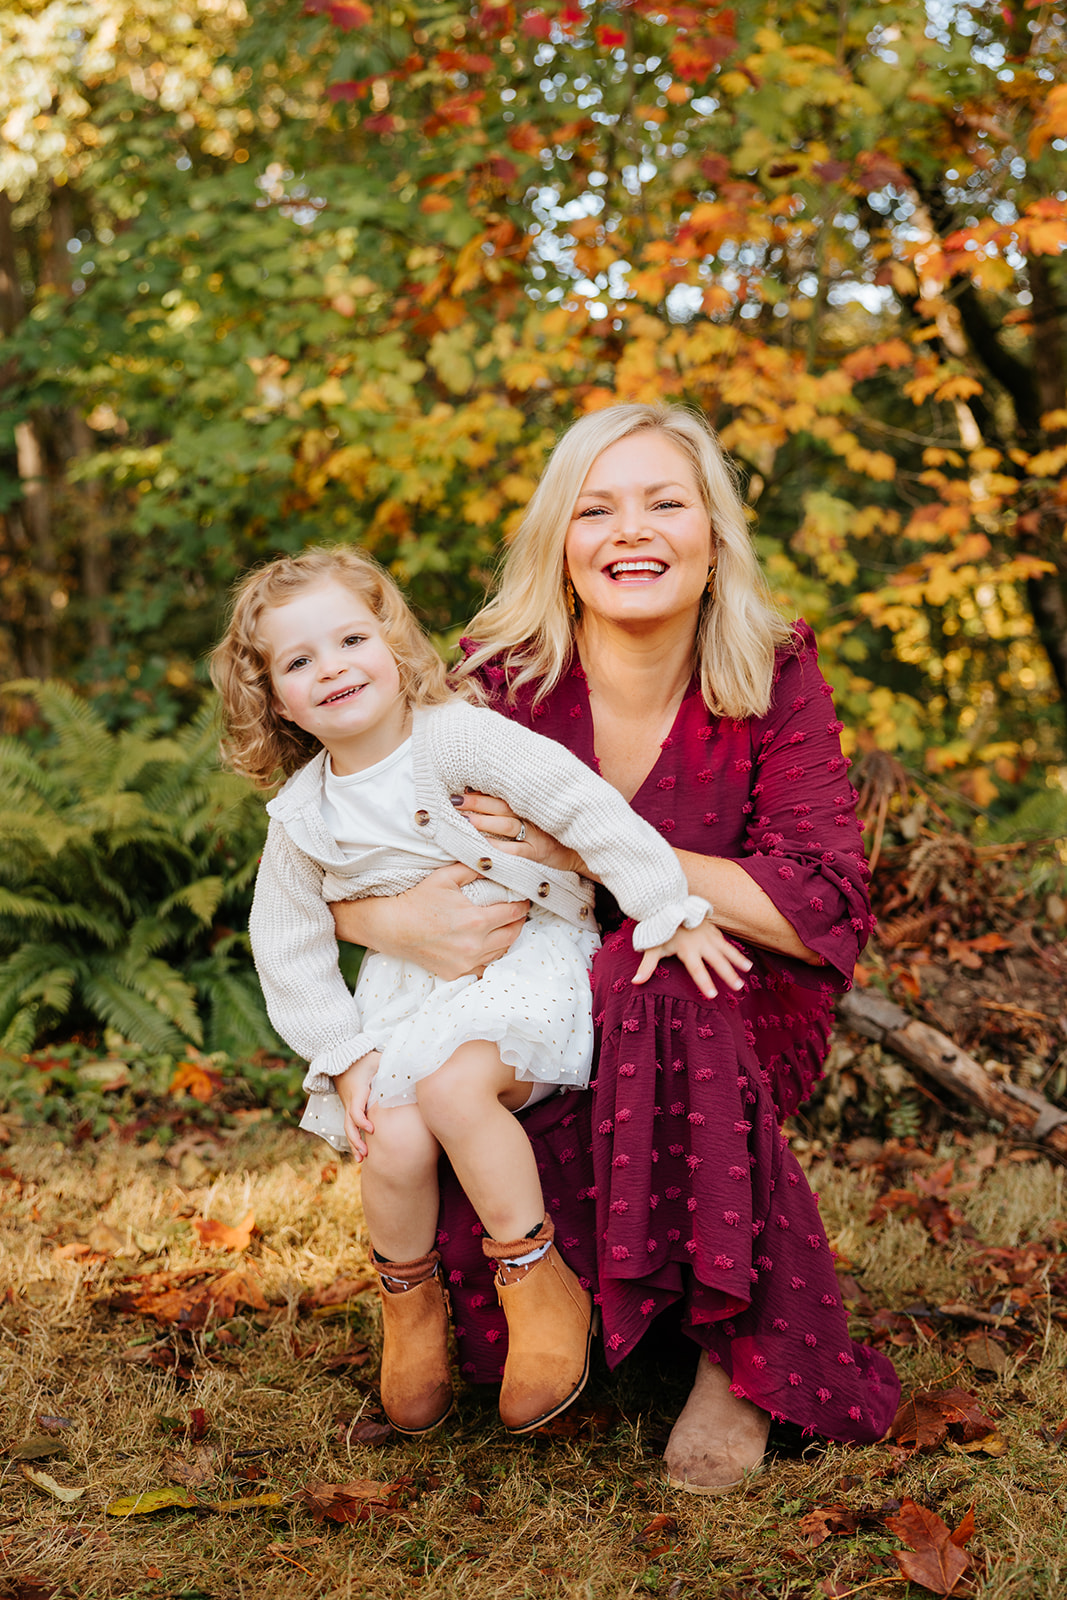 A photo of a mother and daughter smiling for the camera in front of colorful fall foliage at a Seattle park.